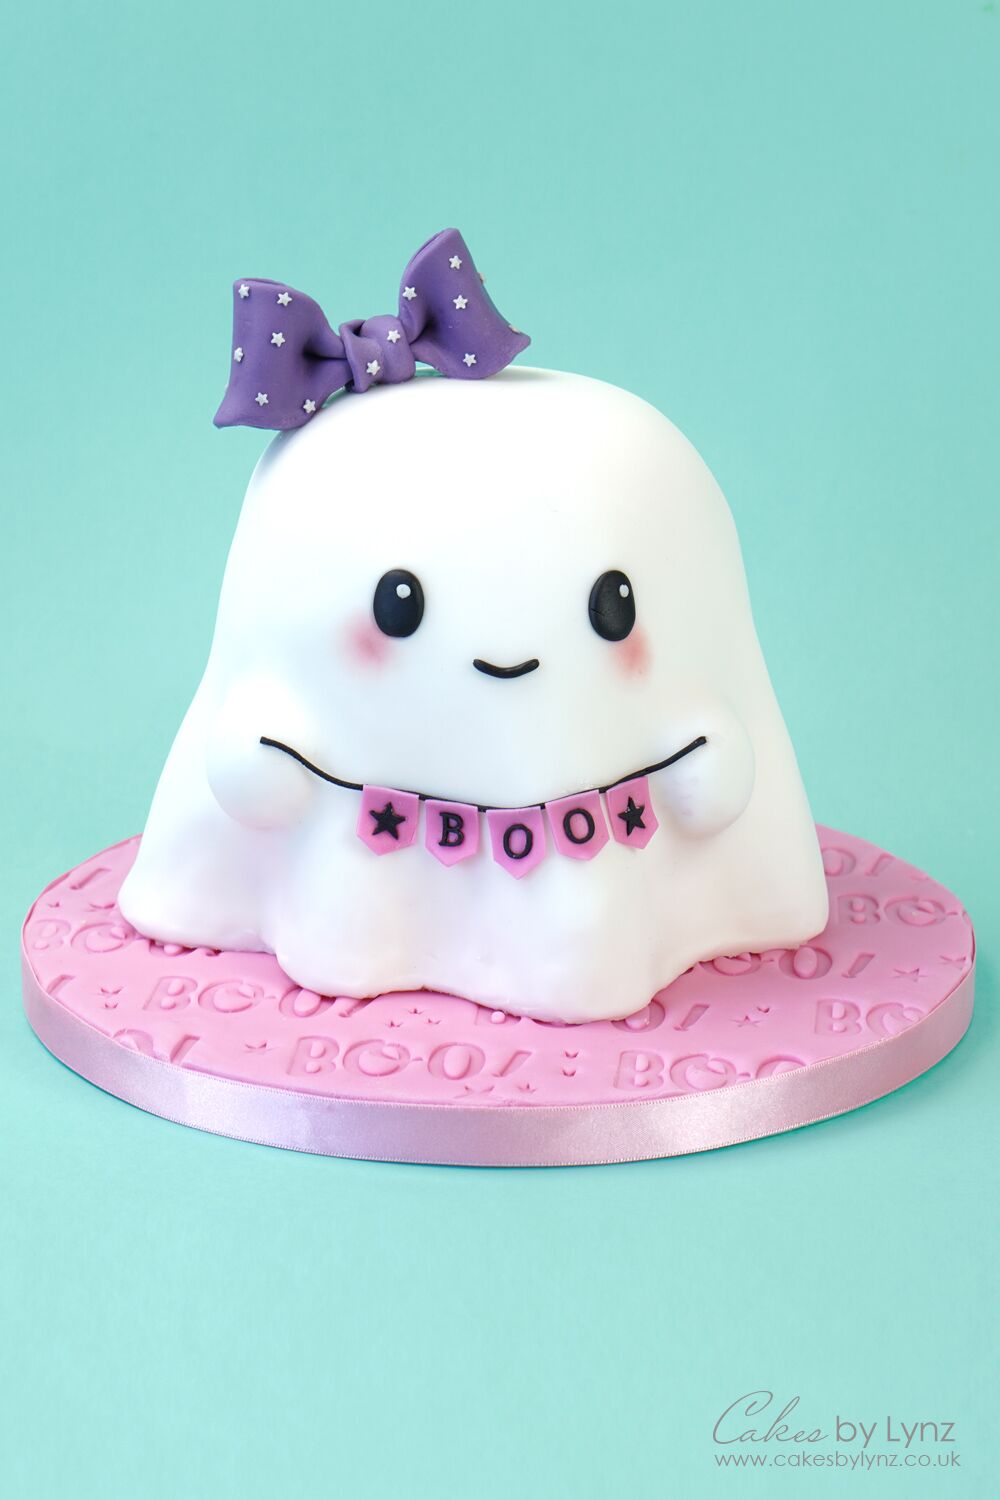 Little Johnny the Friendly Ghost Cake